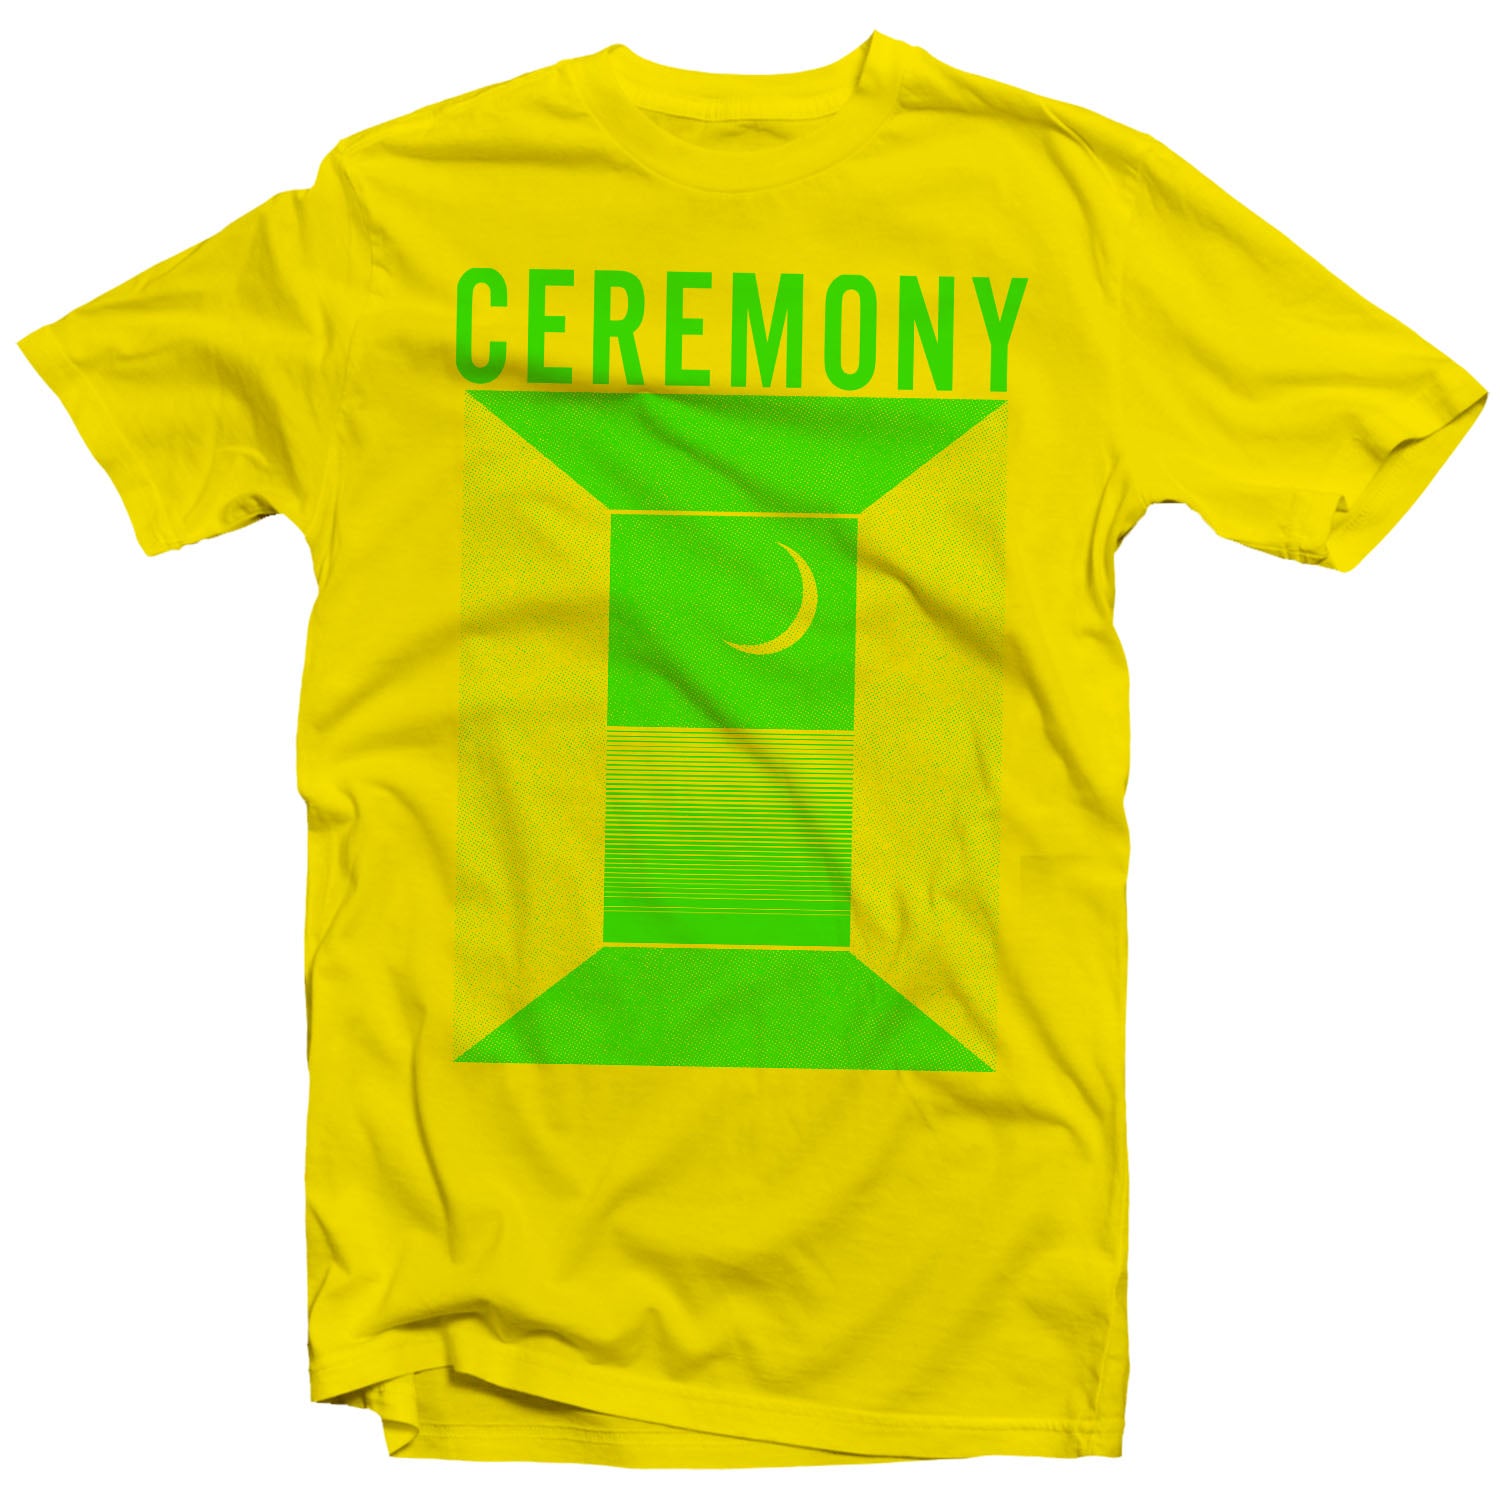 Ceremony "In The Spirit World Now (Synthetic Remixes)" T-Shirt